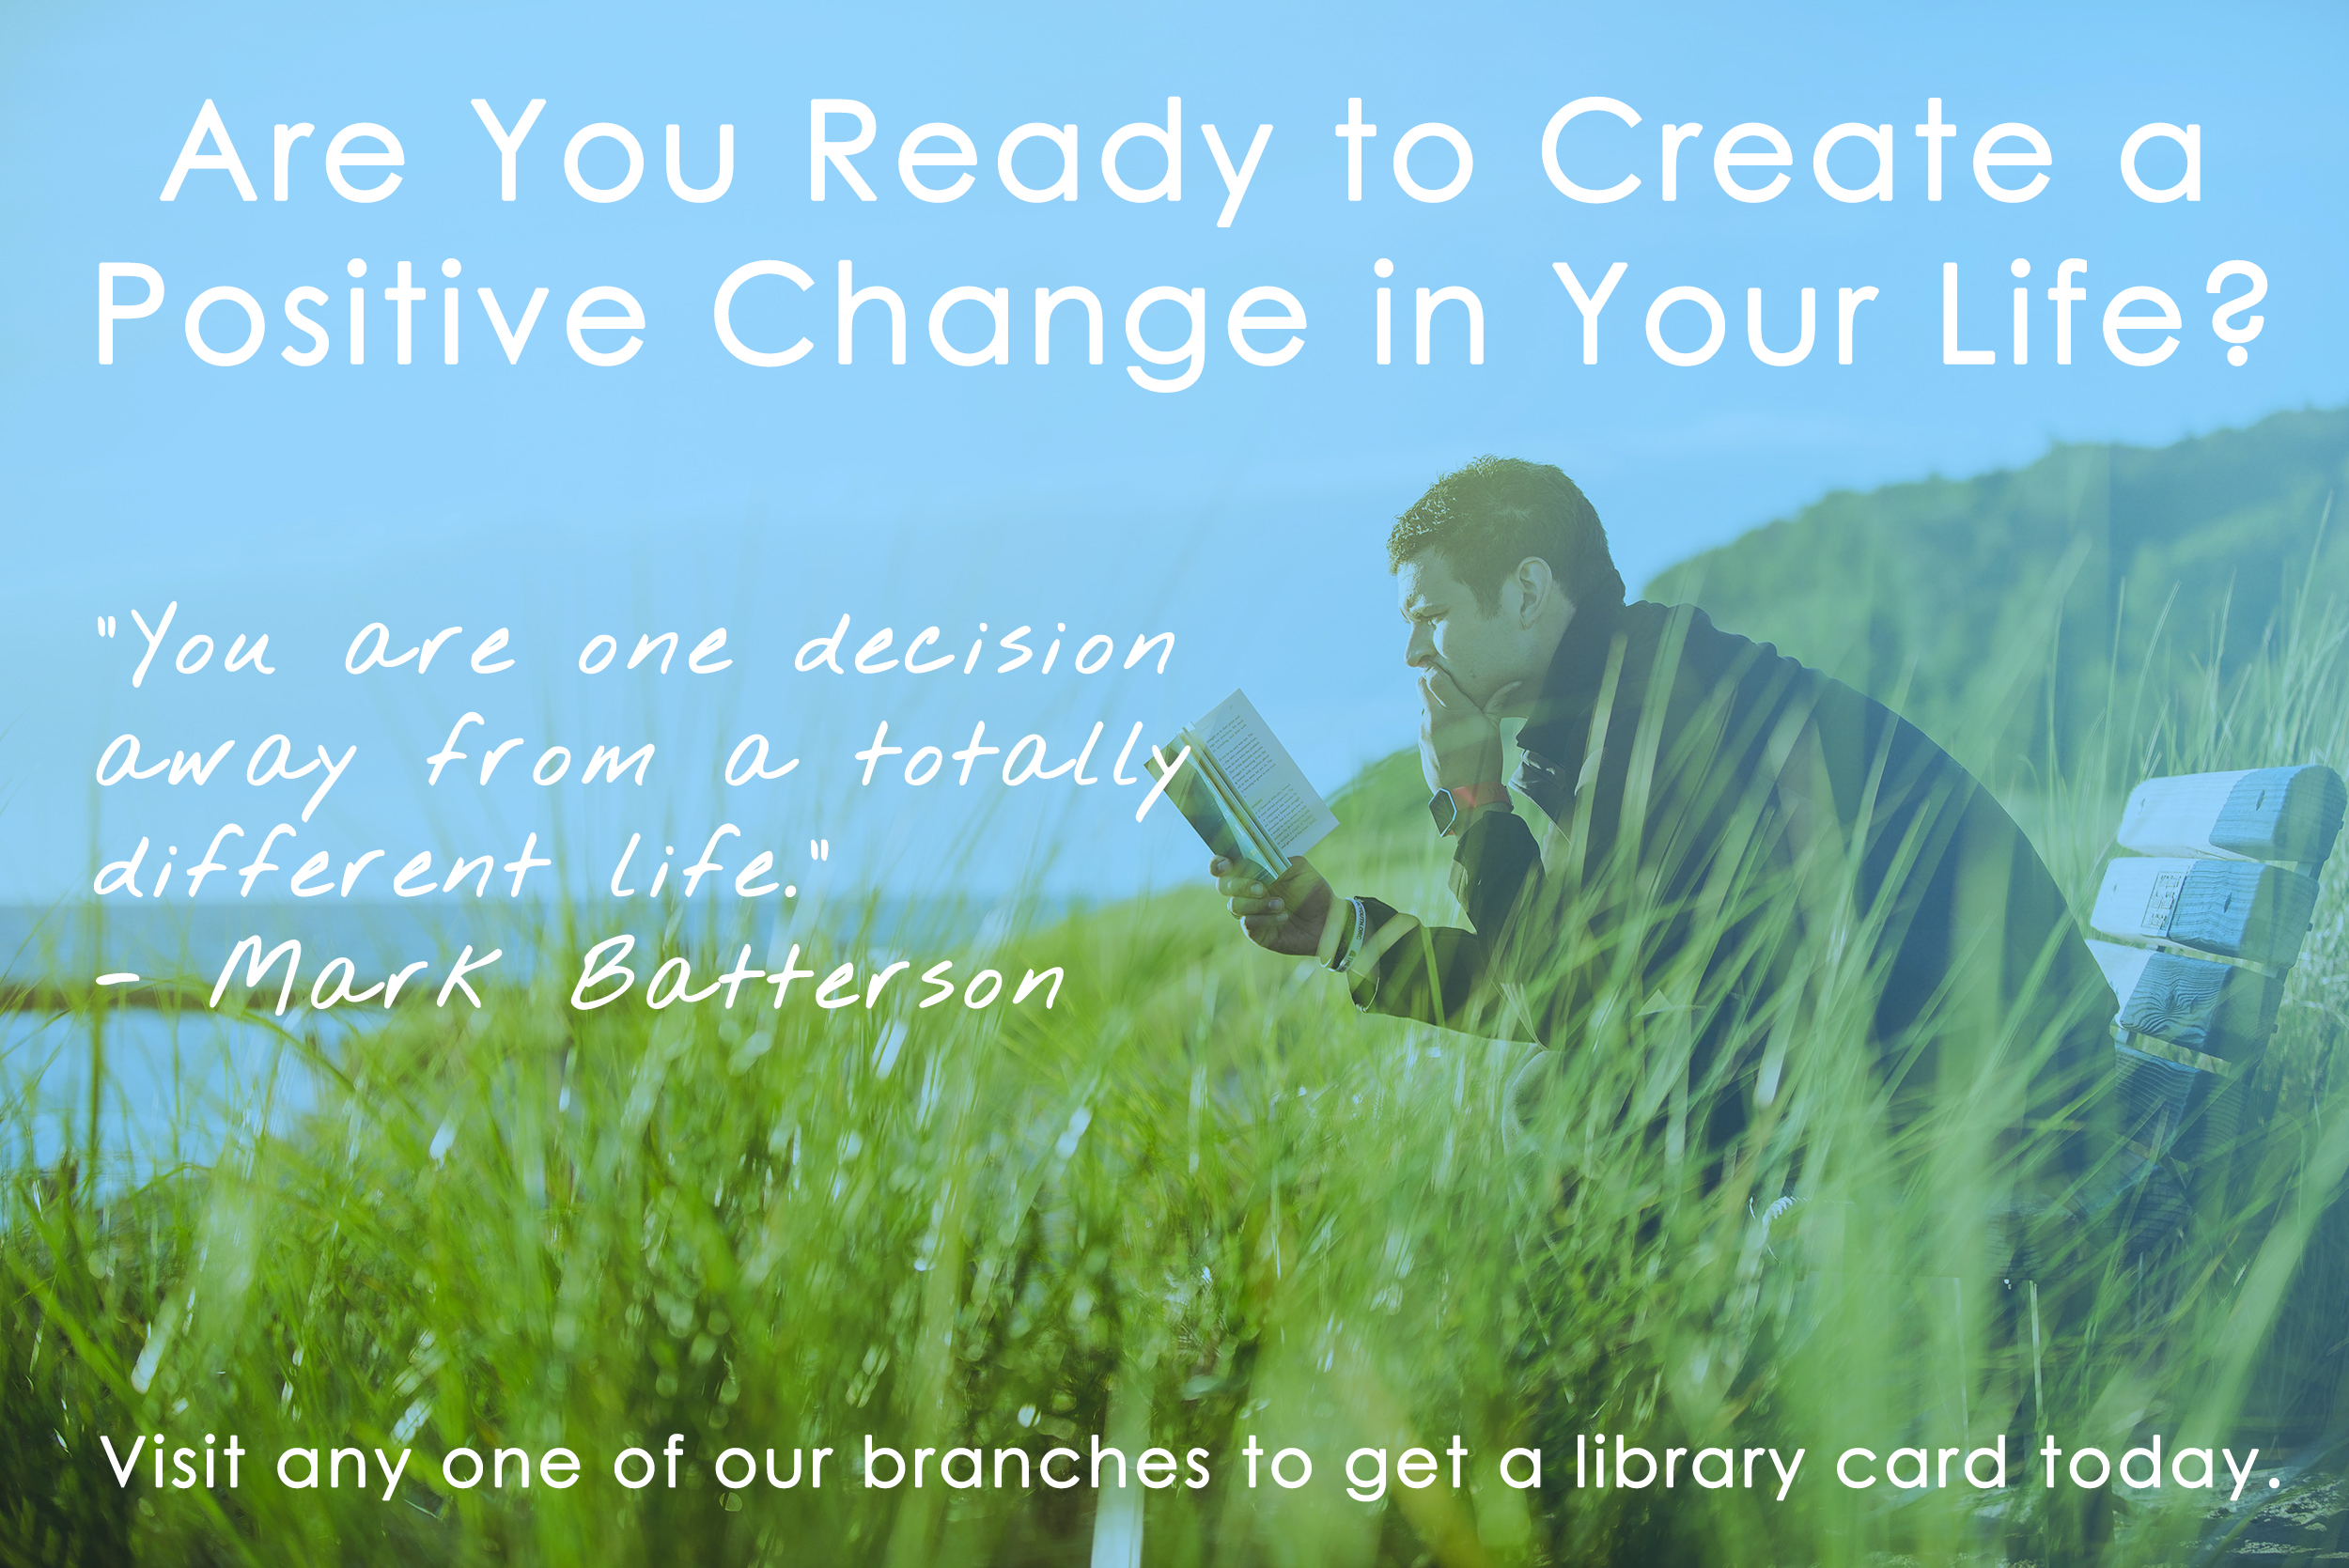 Are you ready to create a positive change in your life?